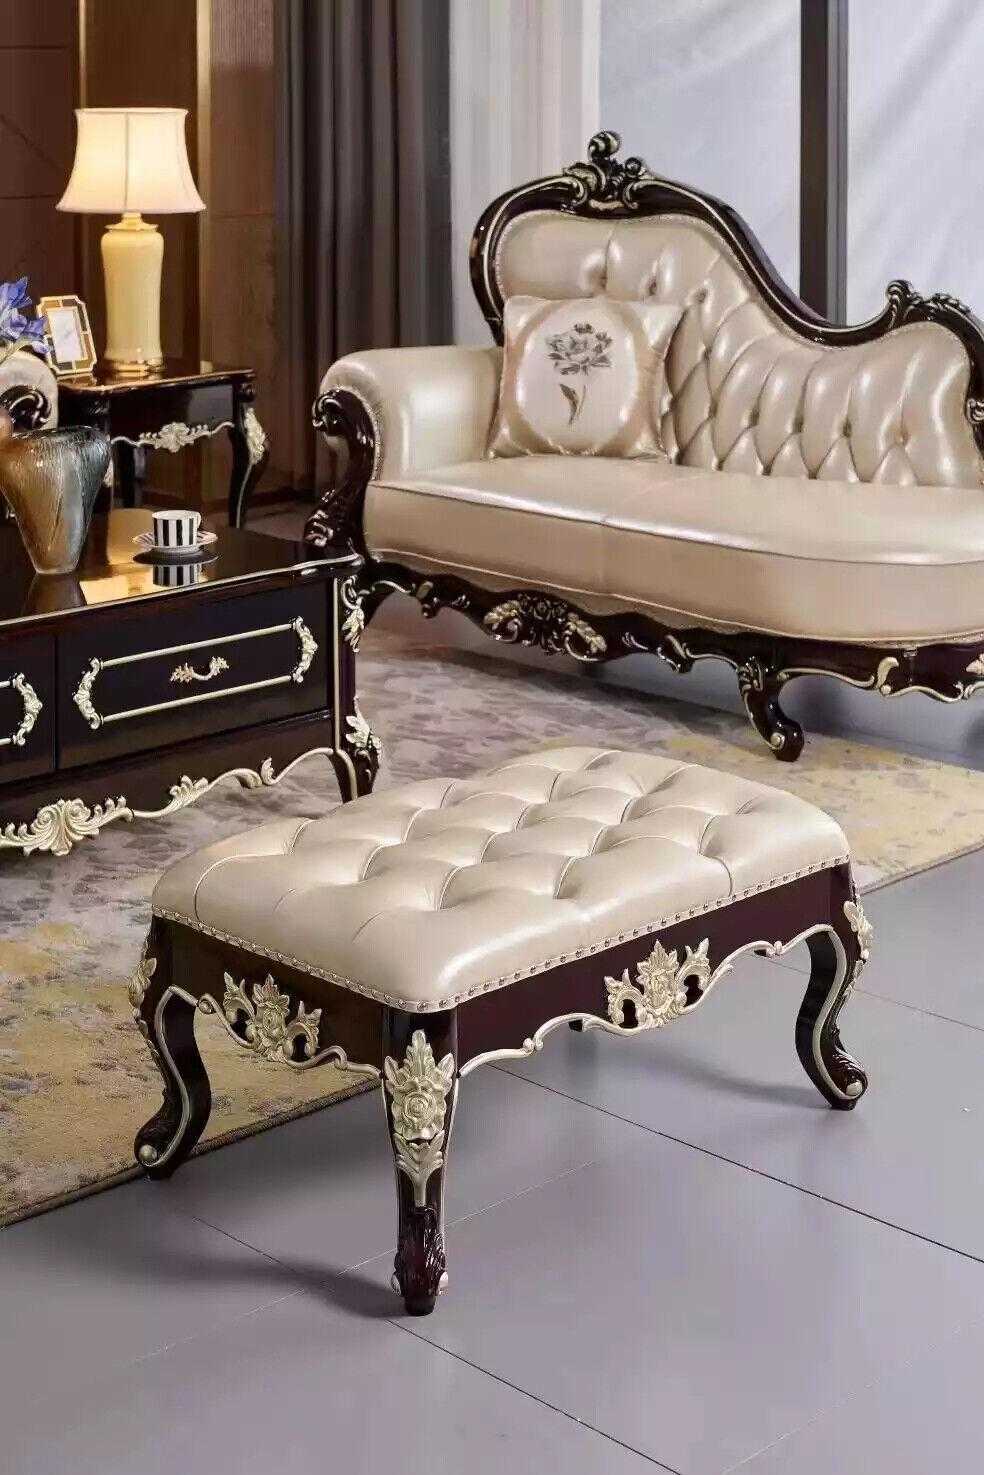 Stool in the bedroom a luxurious new pearl white chesterfield